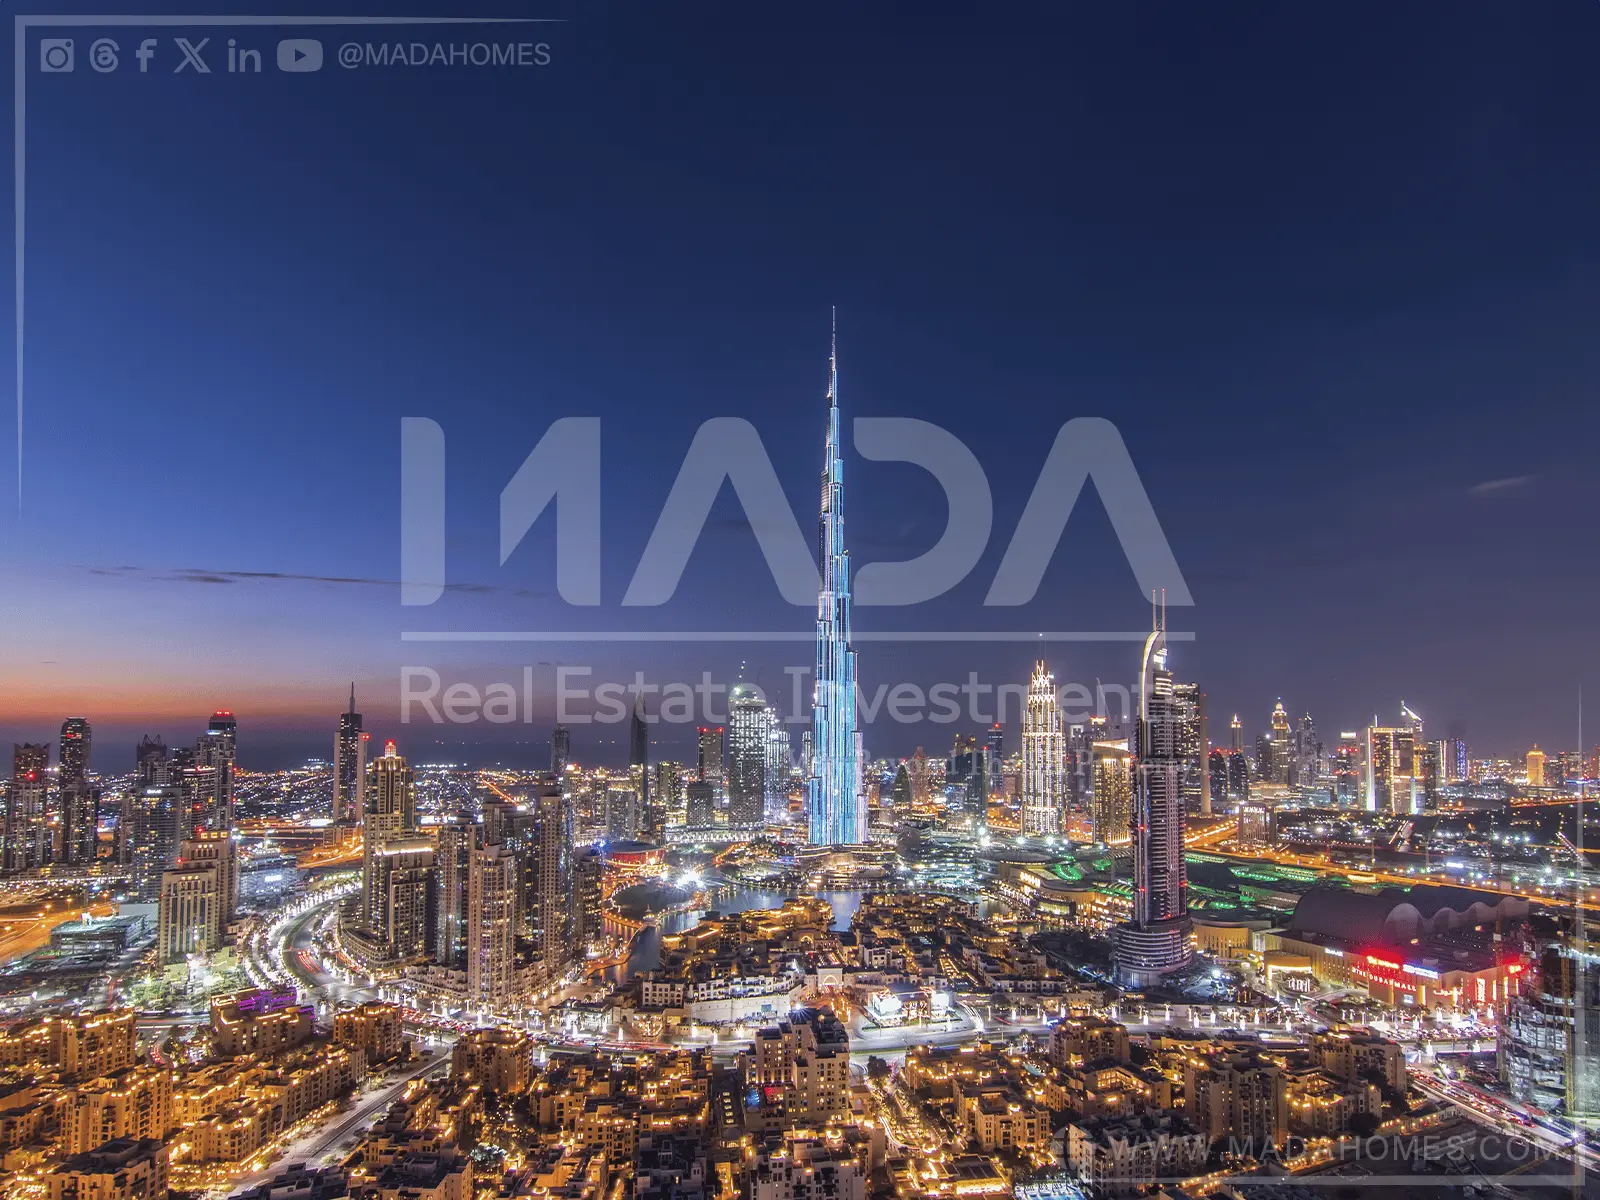 Real estate companies in Dubai get to know Mada